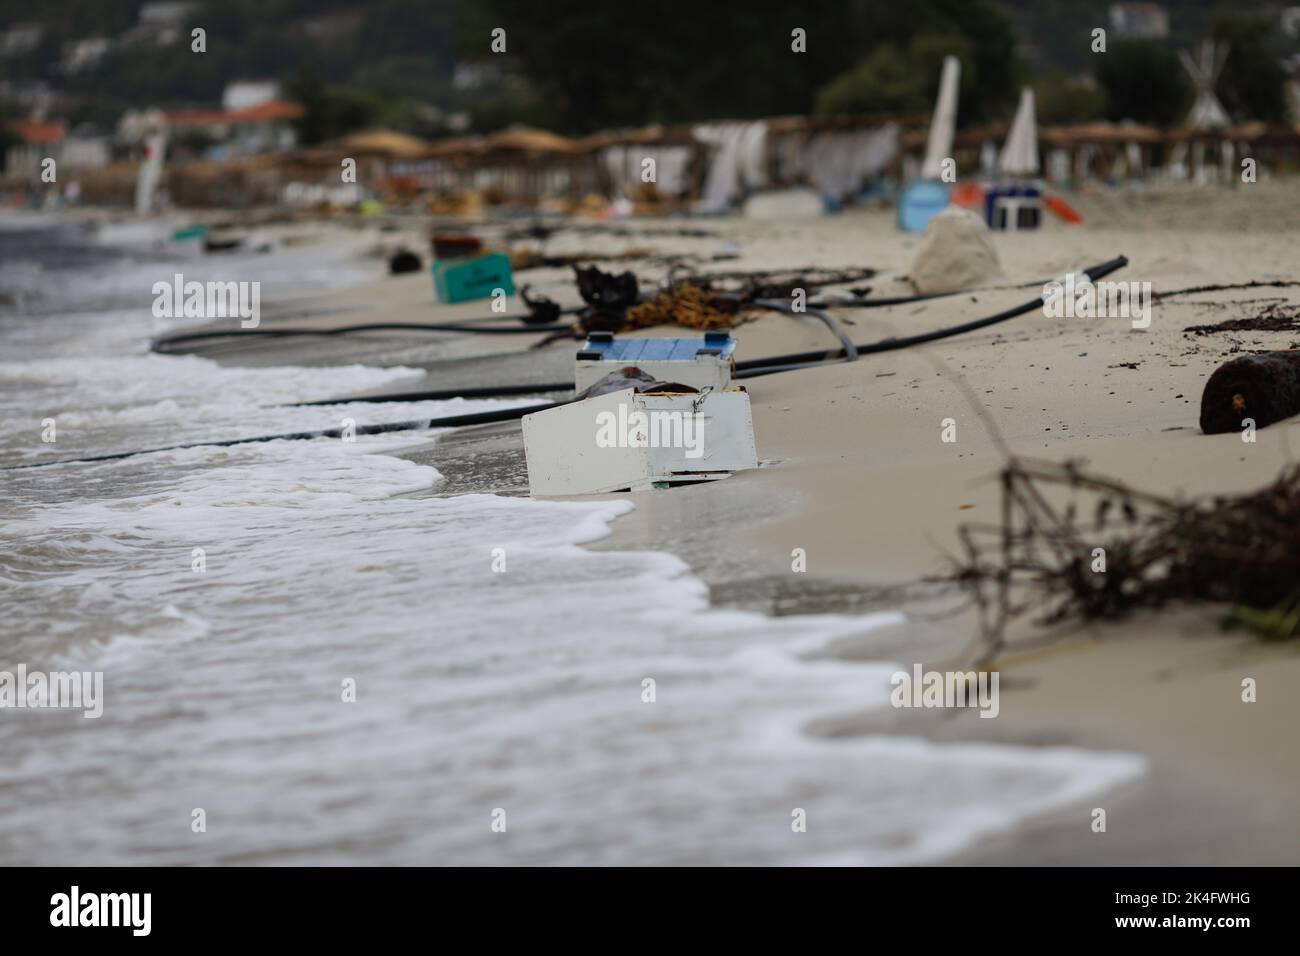 Wood, plastic and even wooden bee hives washed ashore on the Golden Beach in Thassos after a powerful storm on a cloudy summer morning. Stock Photo